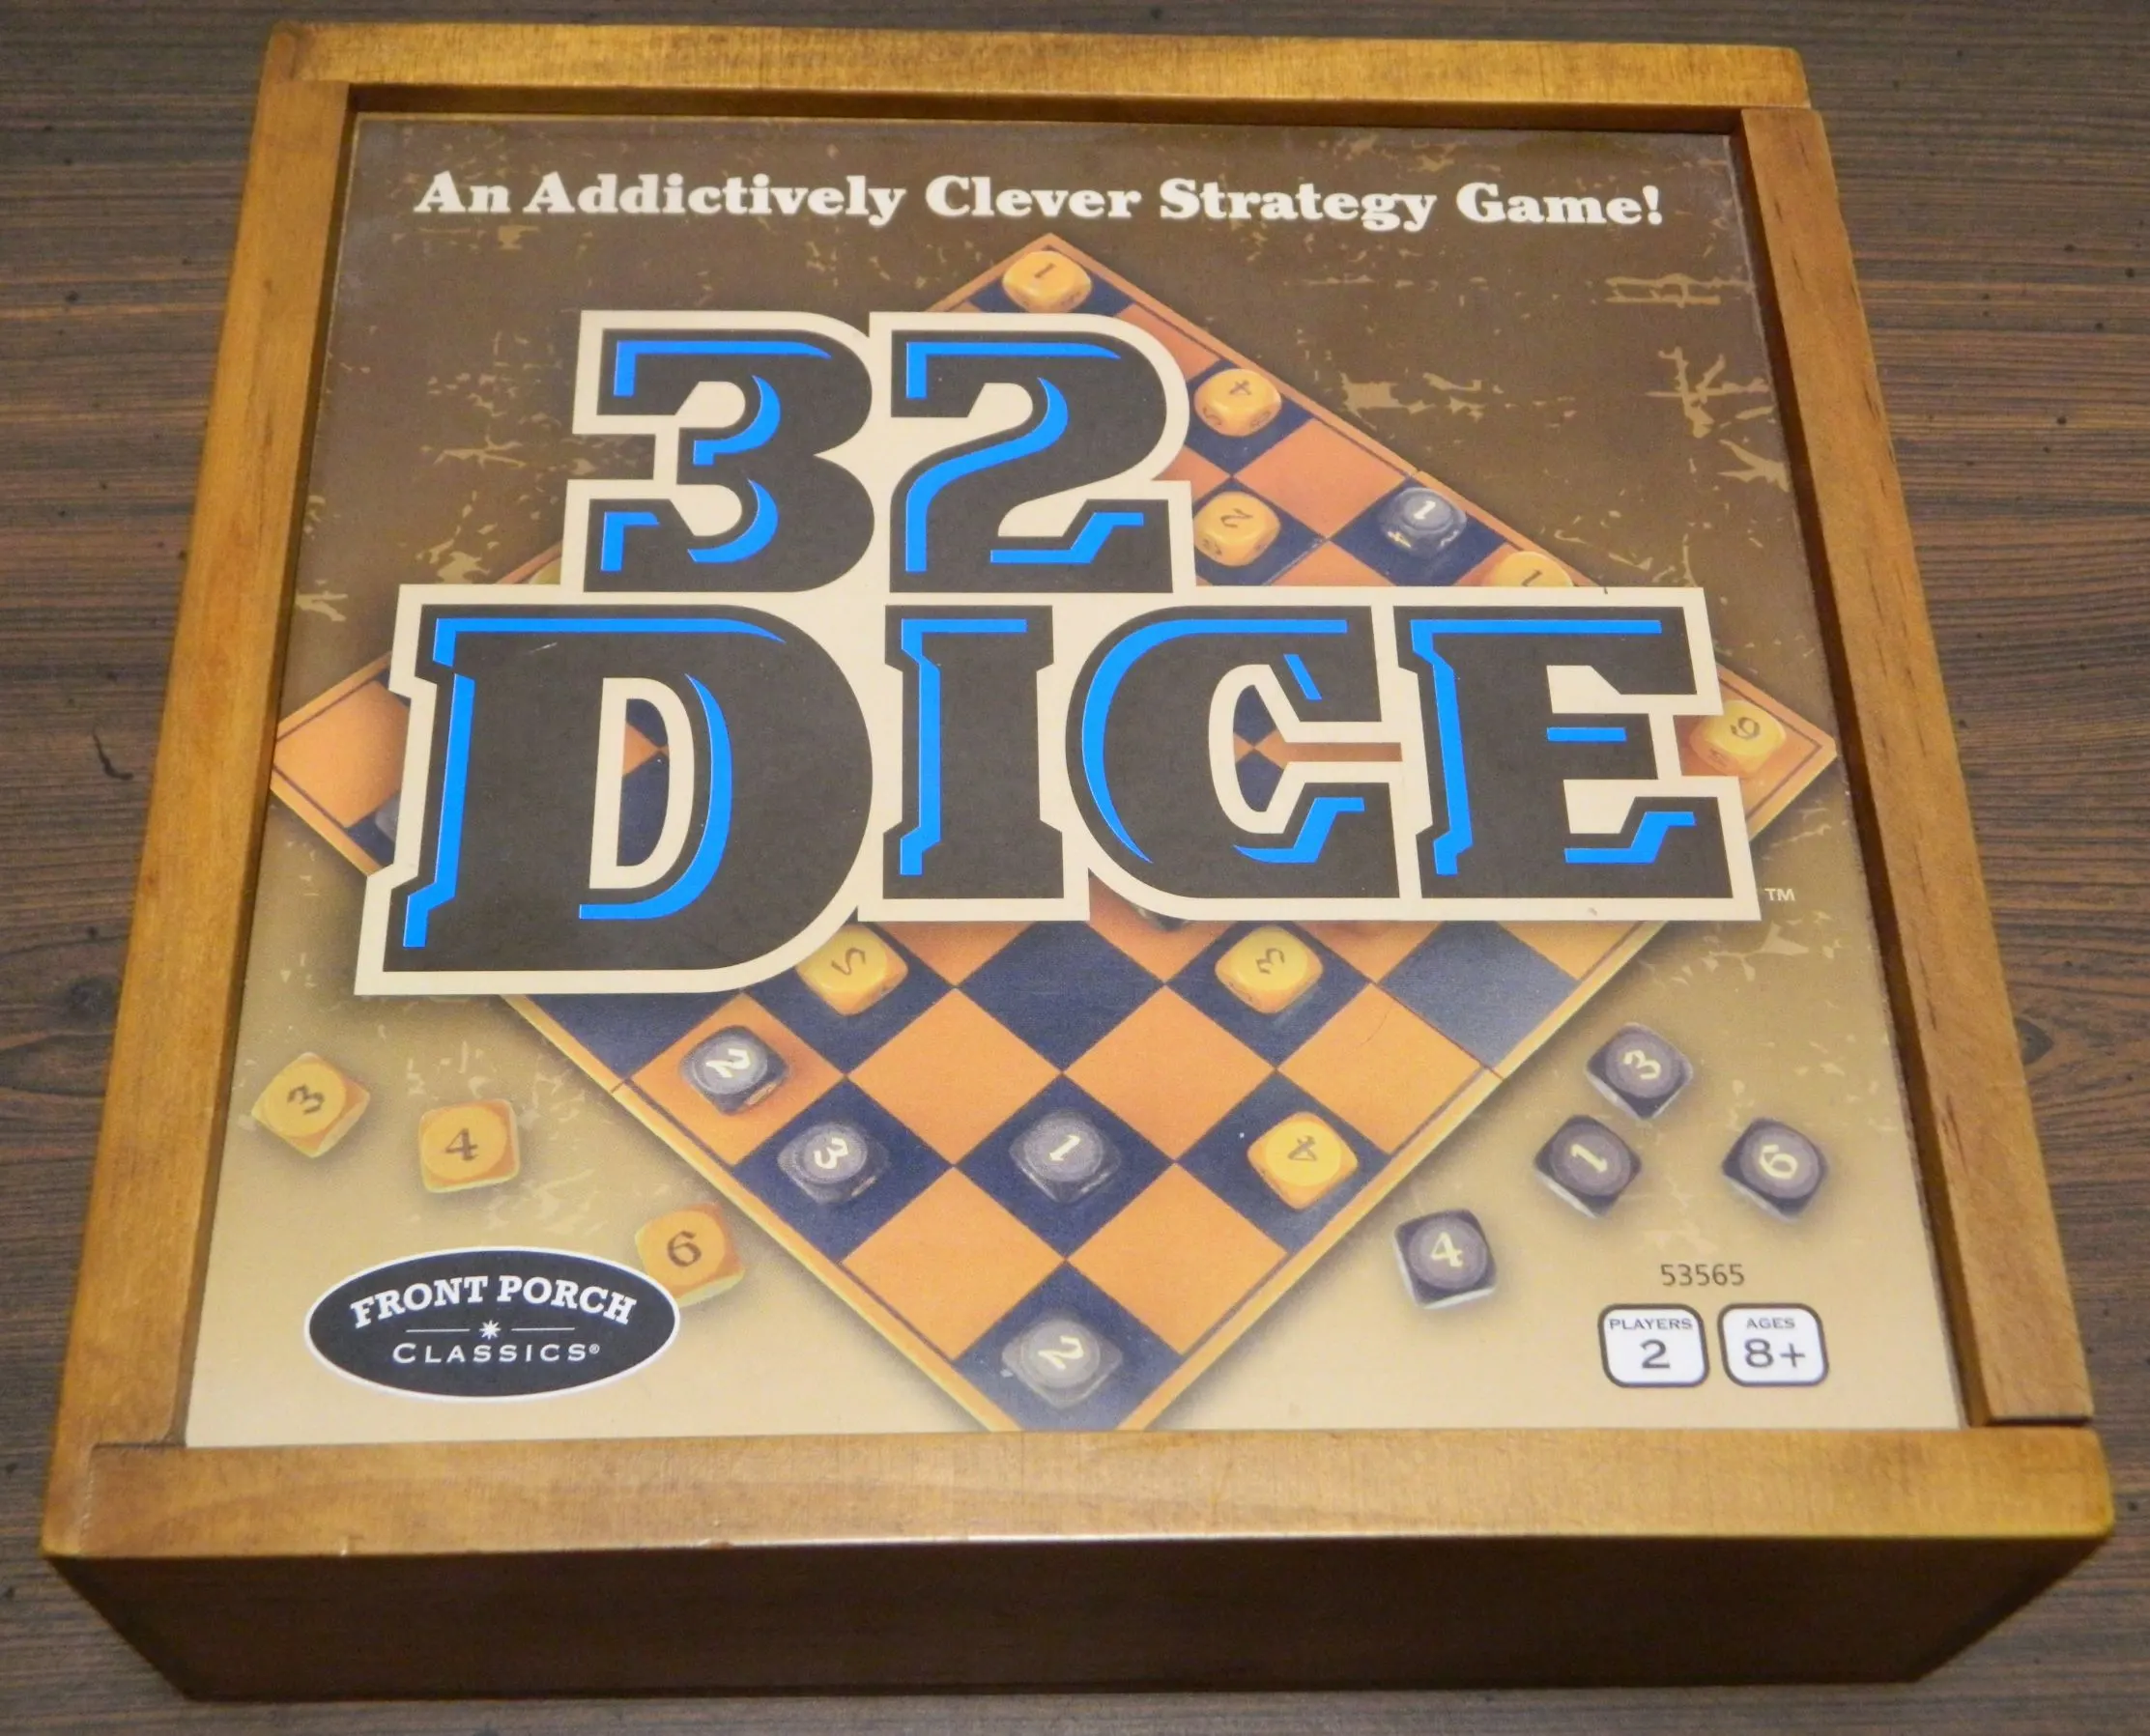 Box for 32 Dice